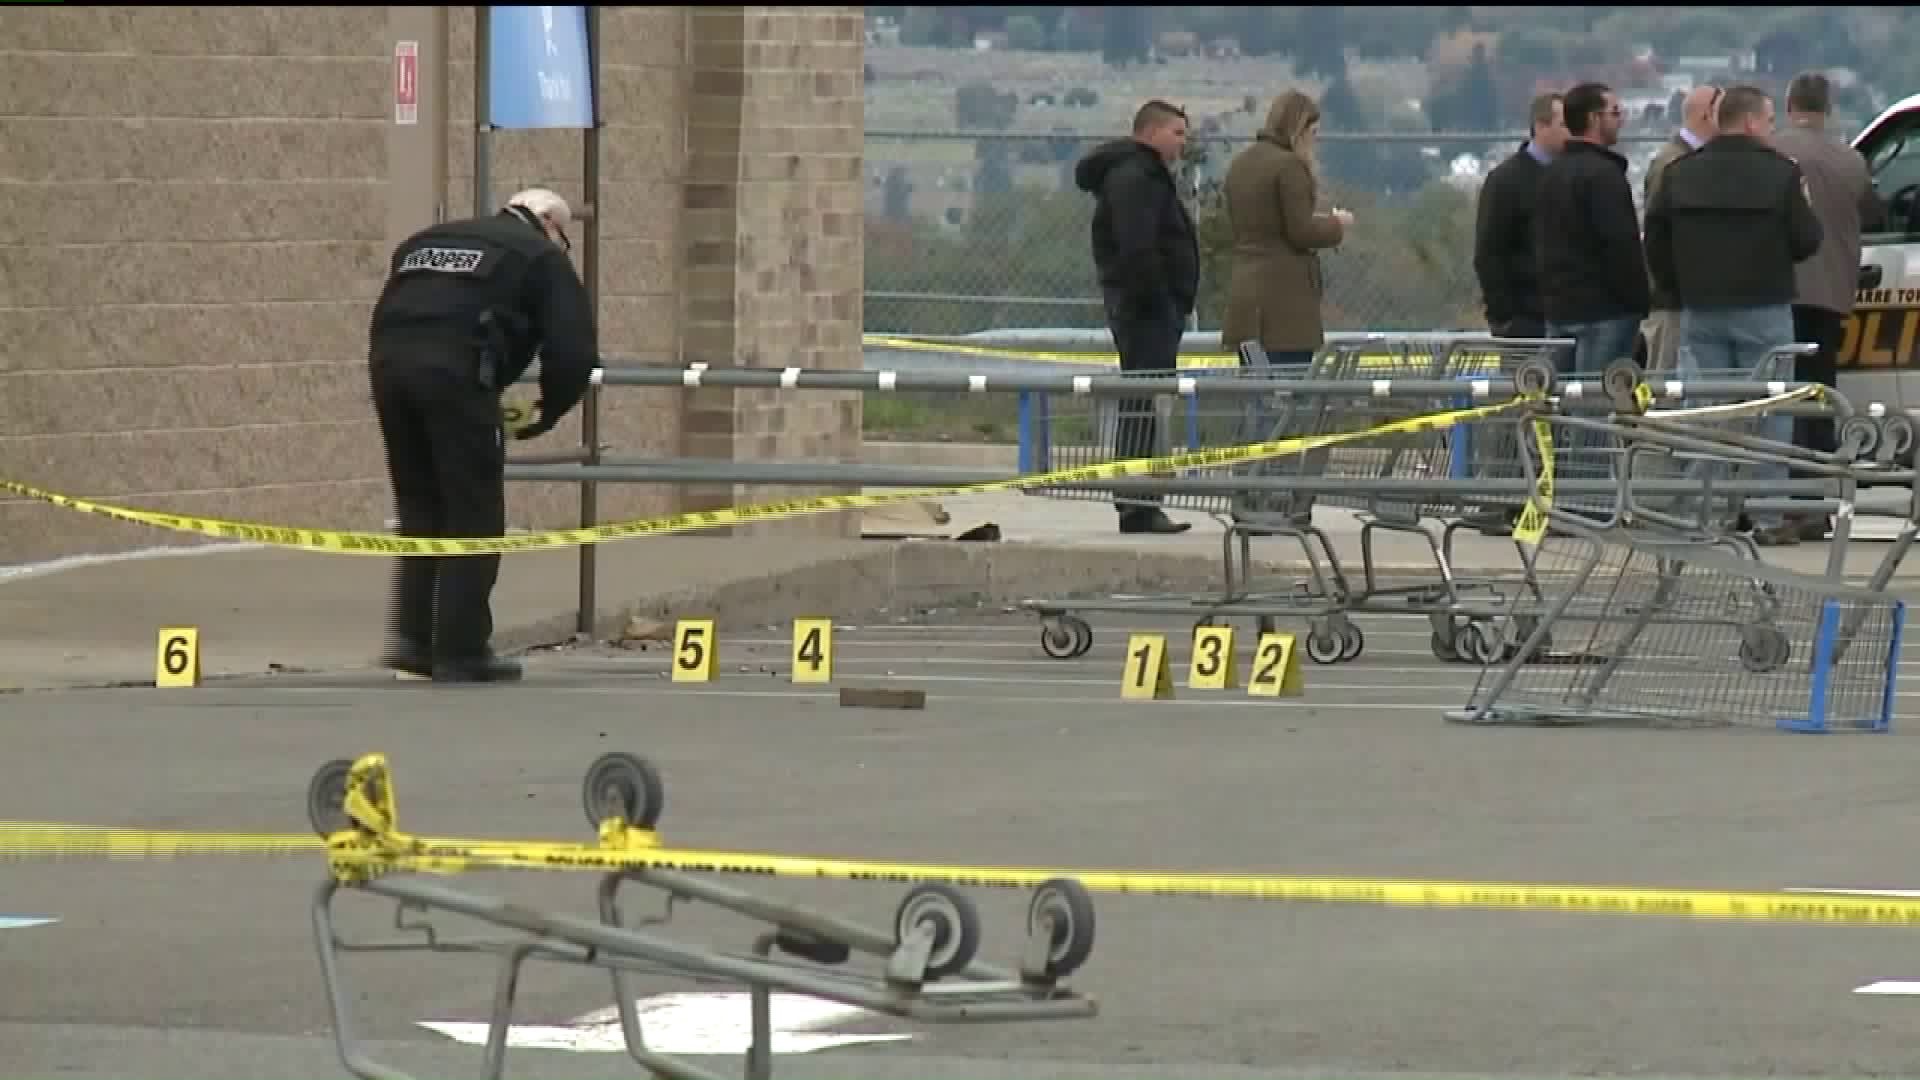 Competency Hearing Requested for Man Accused of Firing Shots Outside Walmart